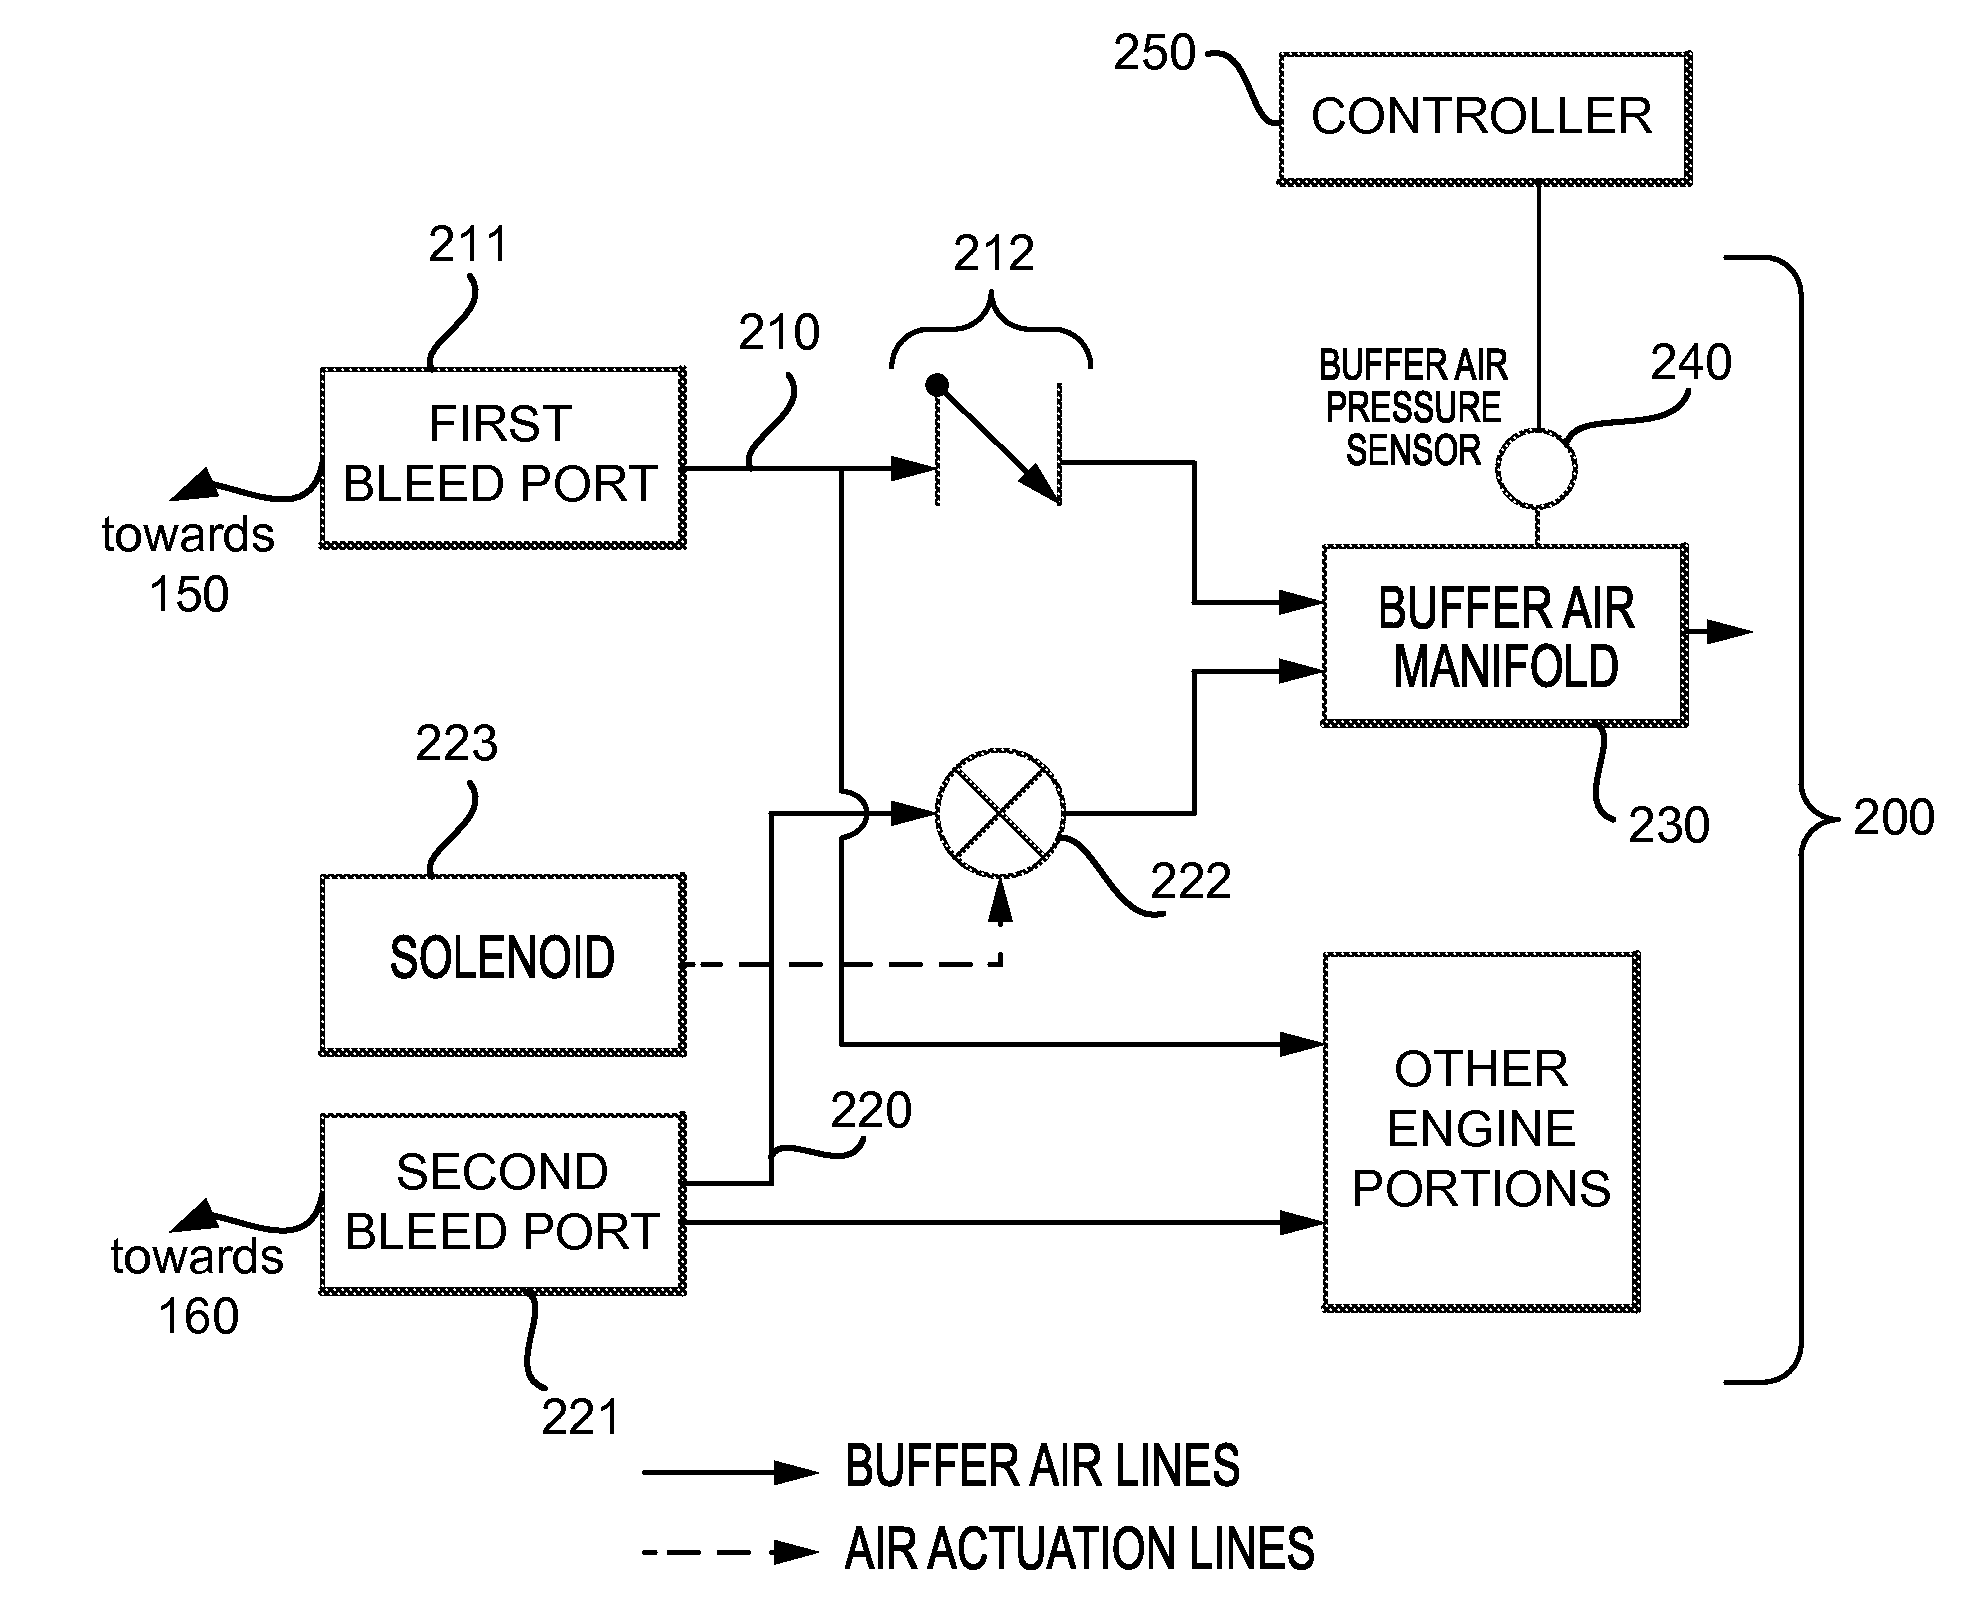 Transient fault detection methods and systems